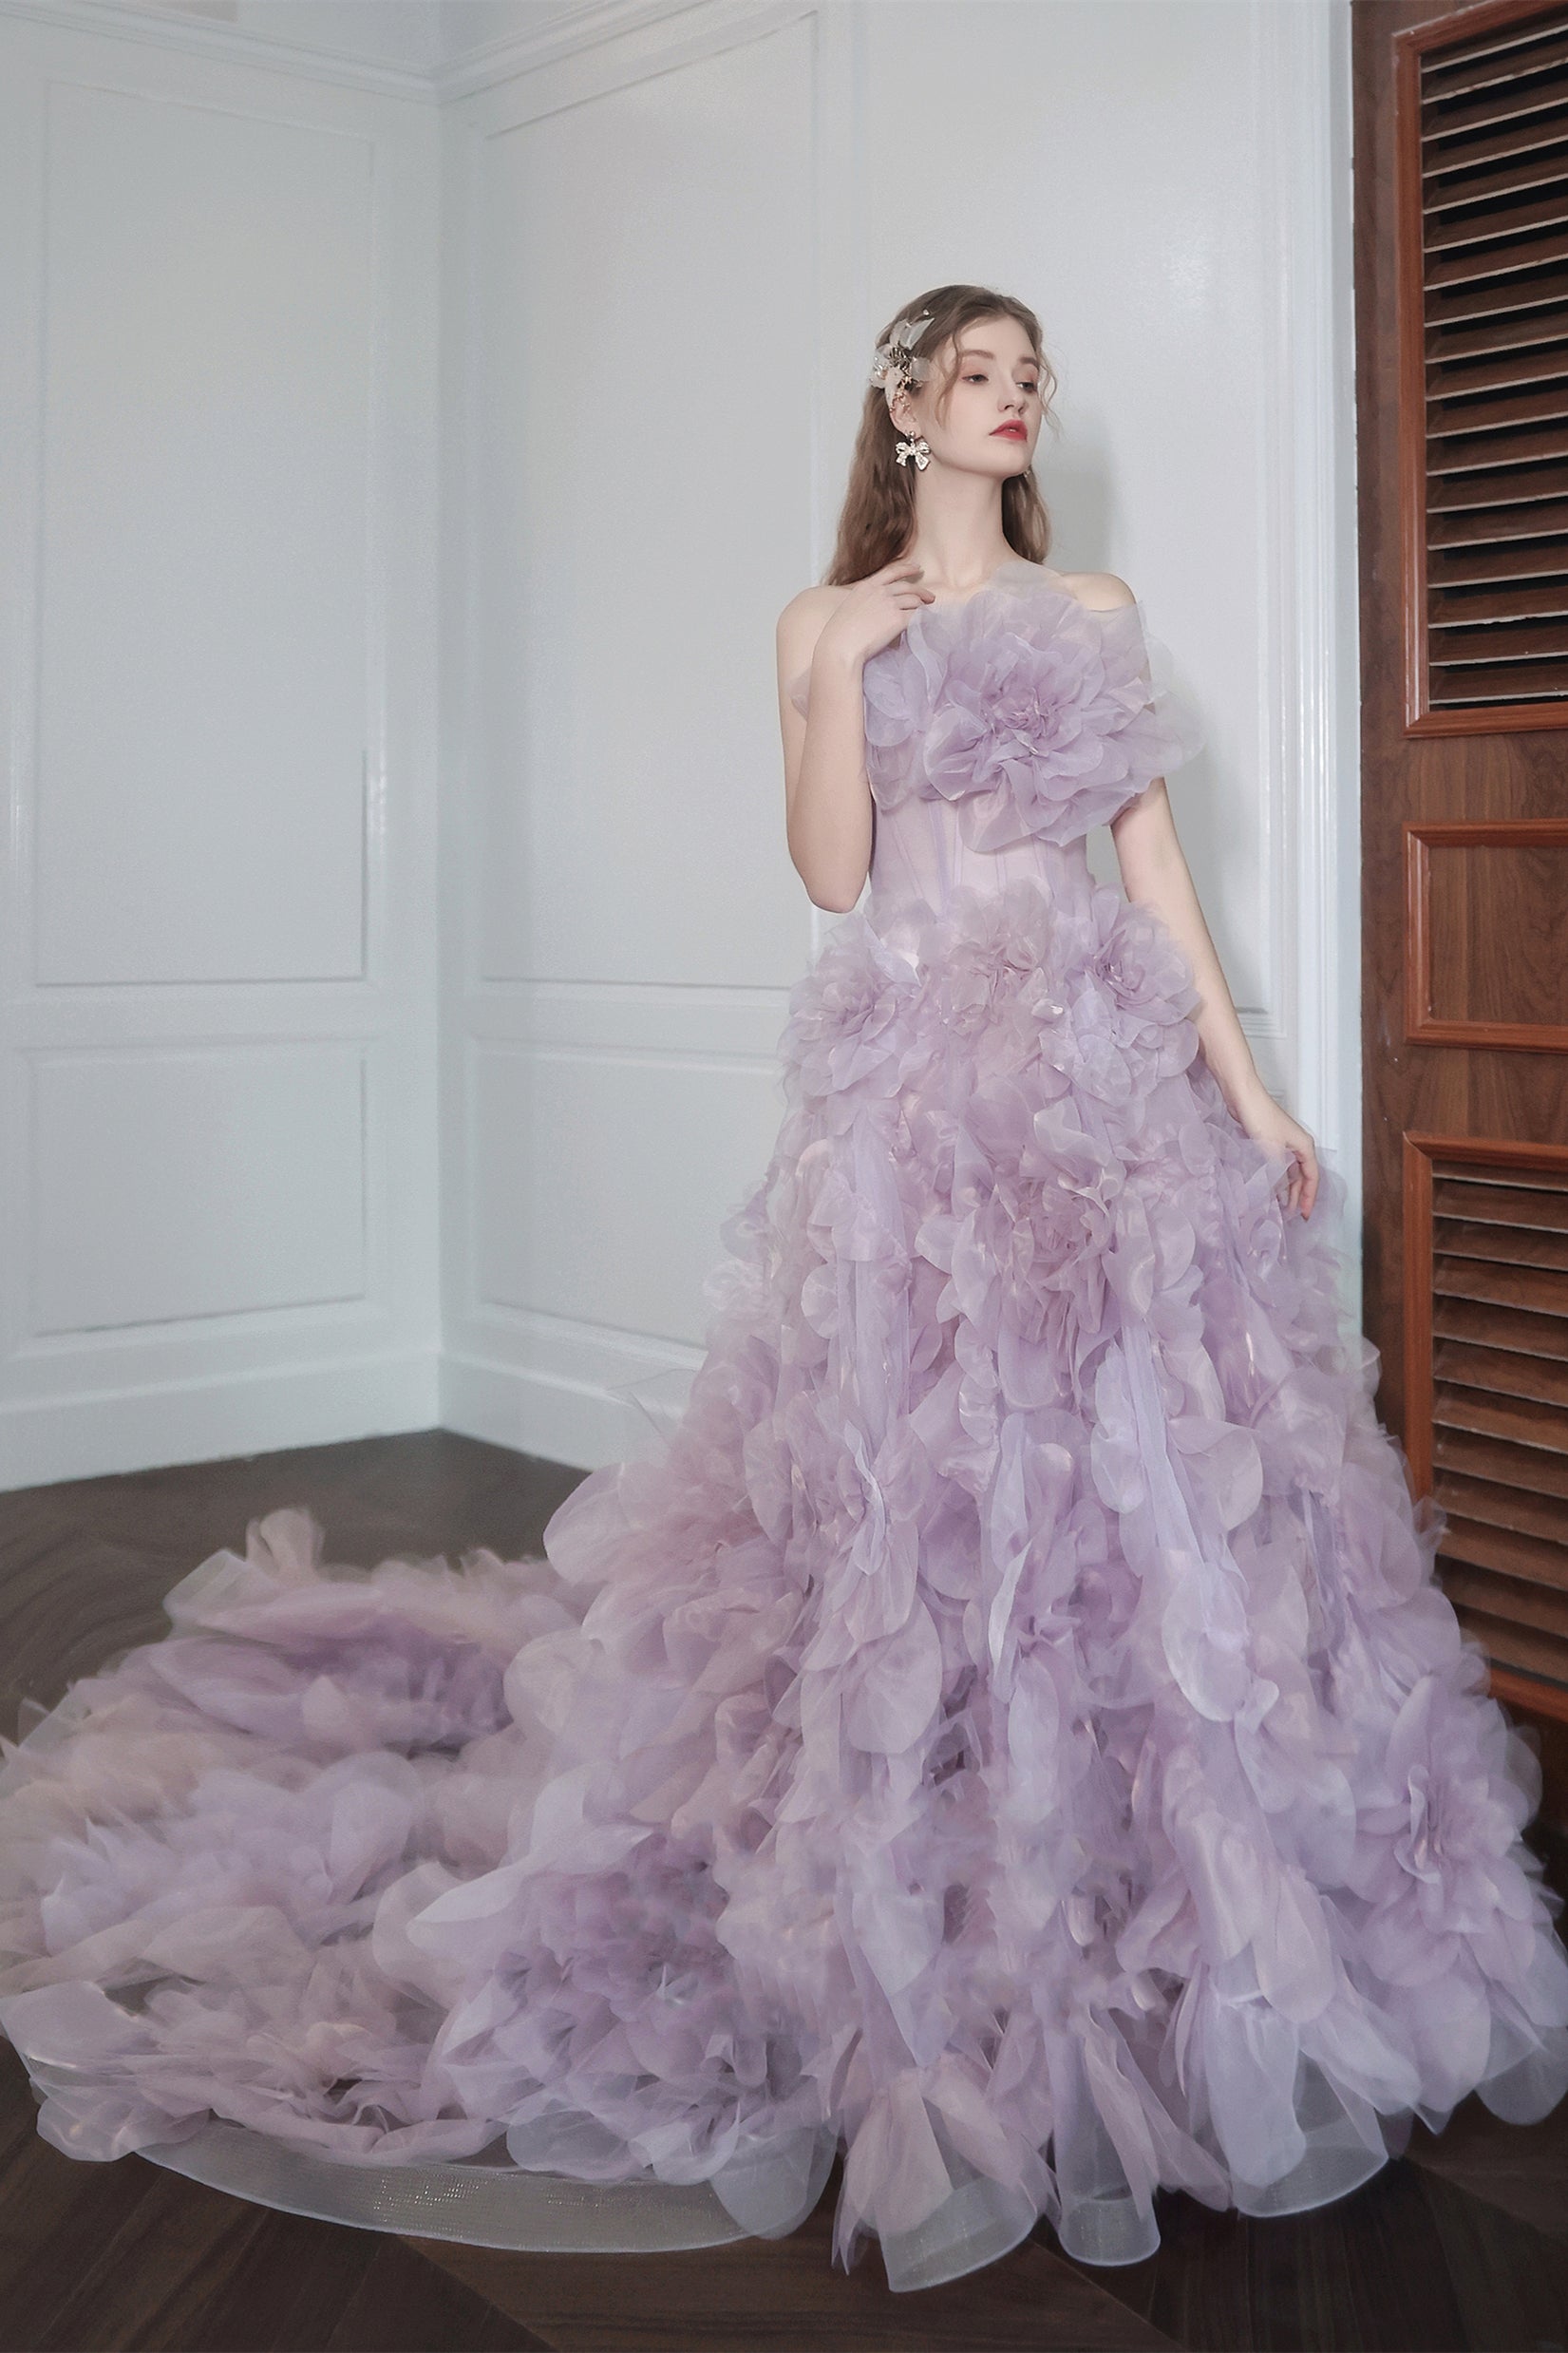 Newest Handmade Purple floral Prom Dresses, Wedding Dresses, Customized Prom Gown, 2021 Prom Dresses